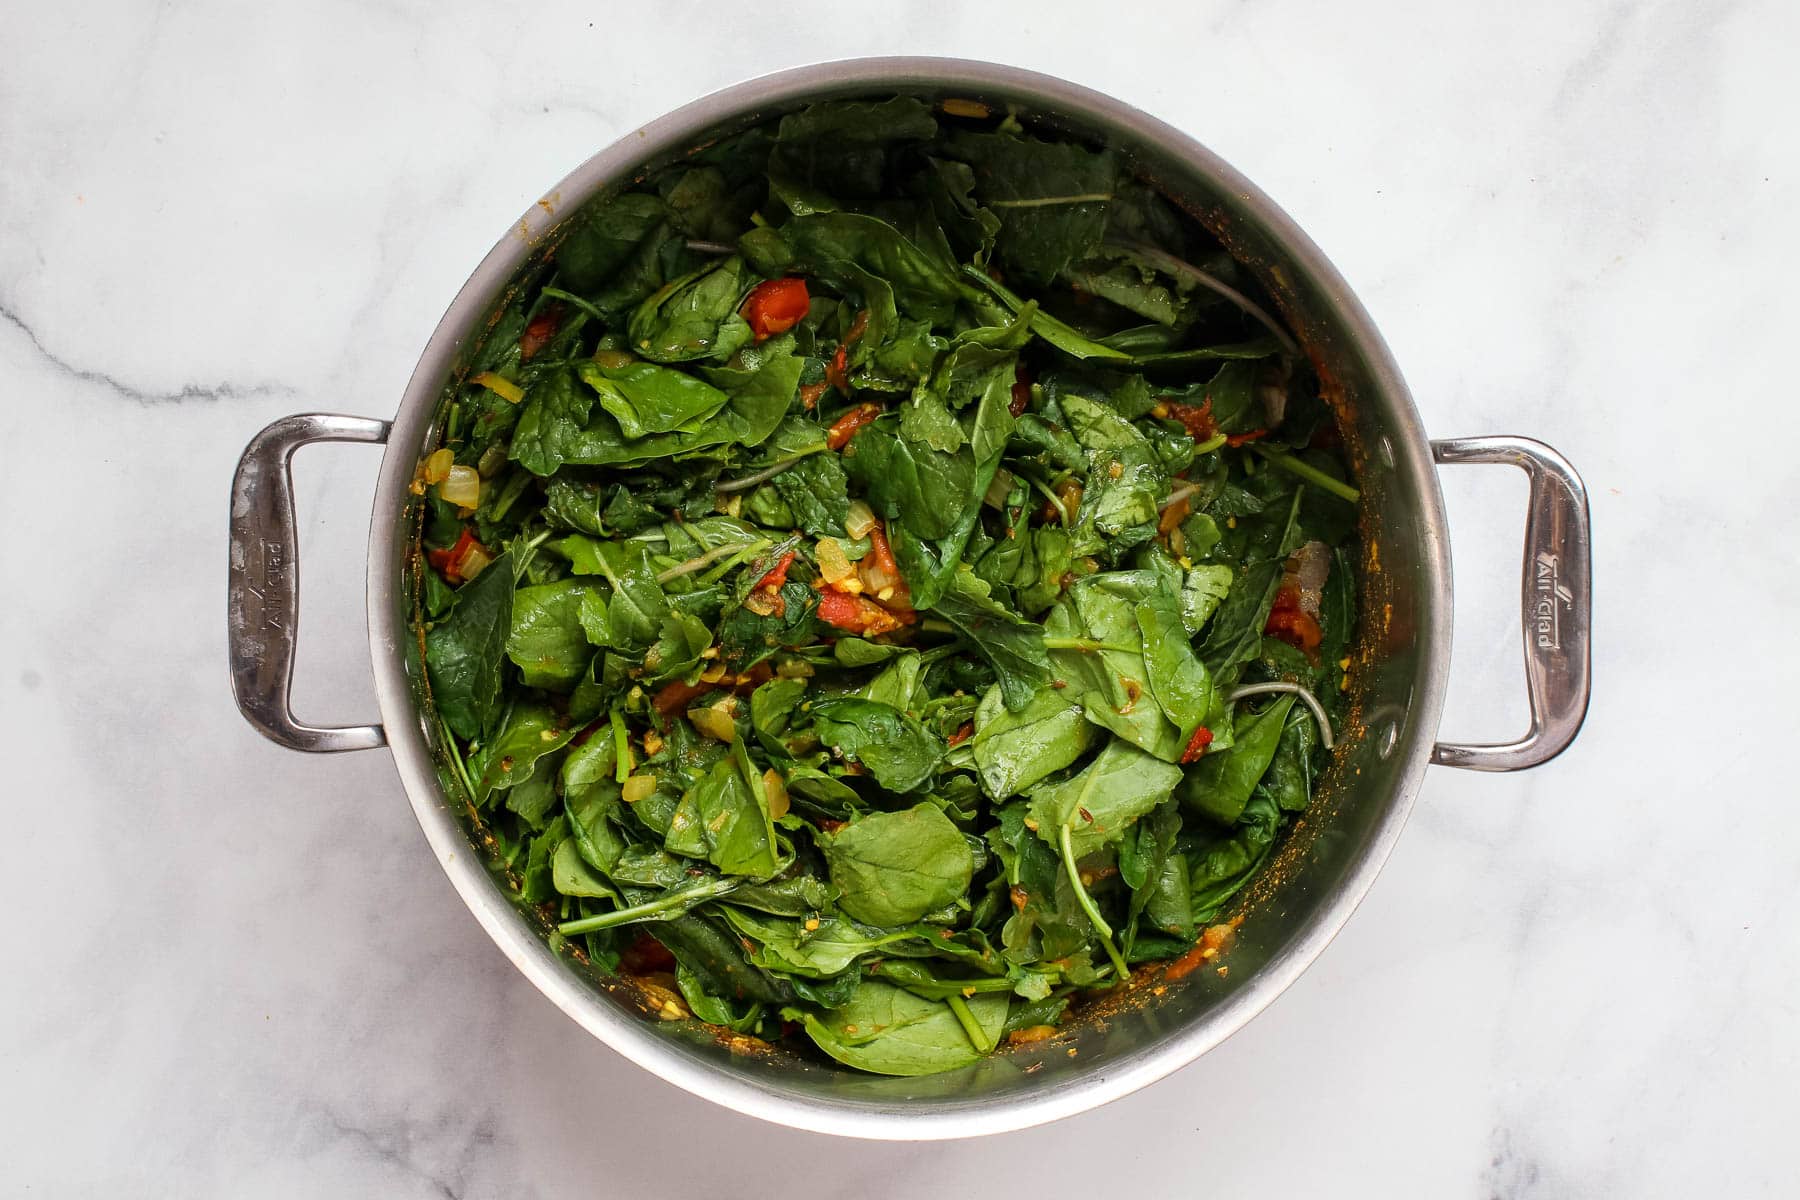 Pot of wilting spinach.